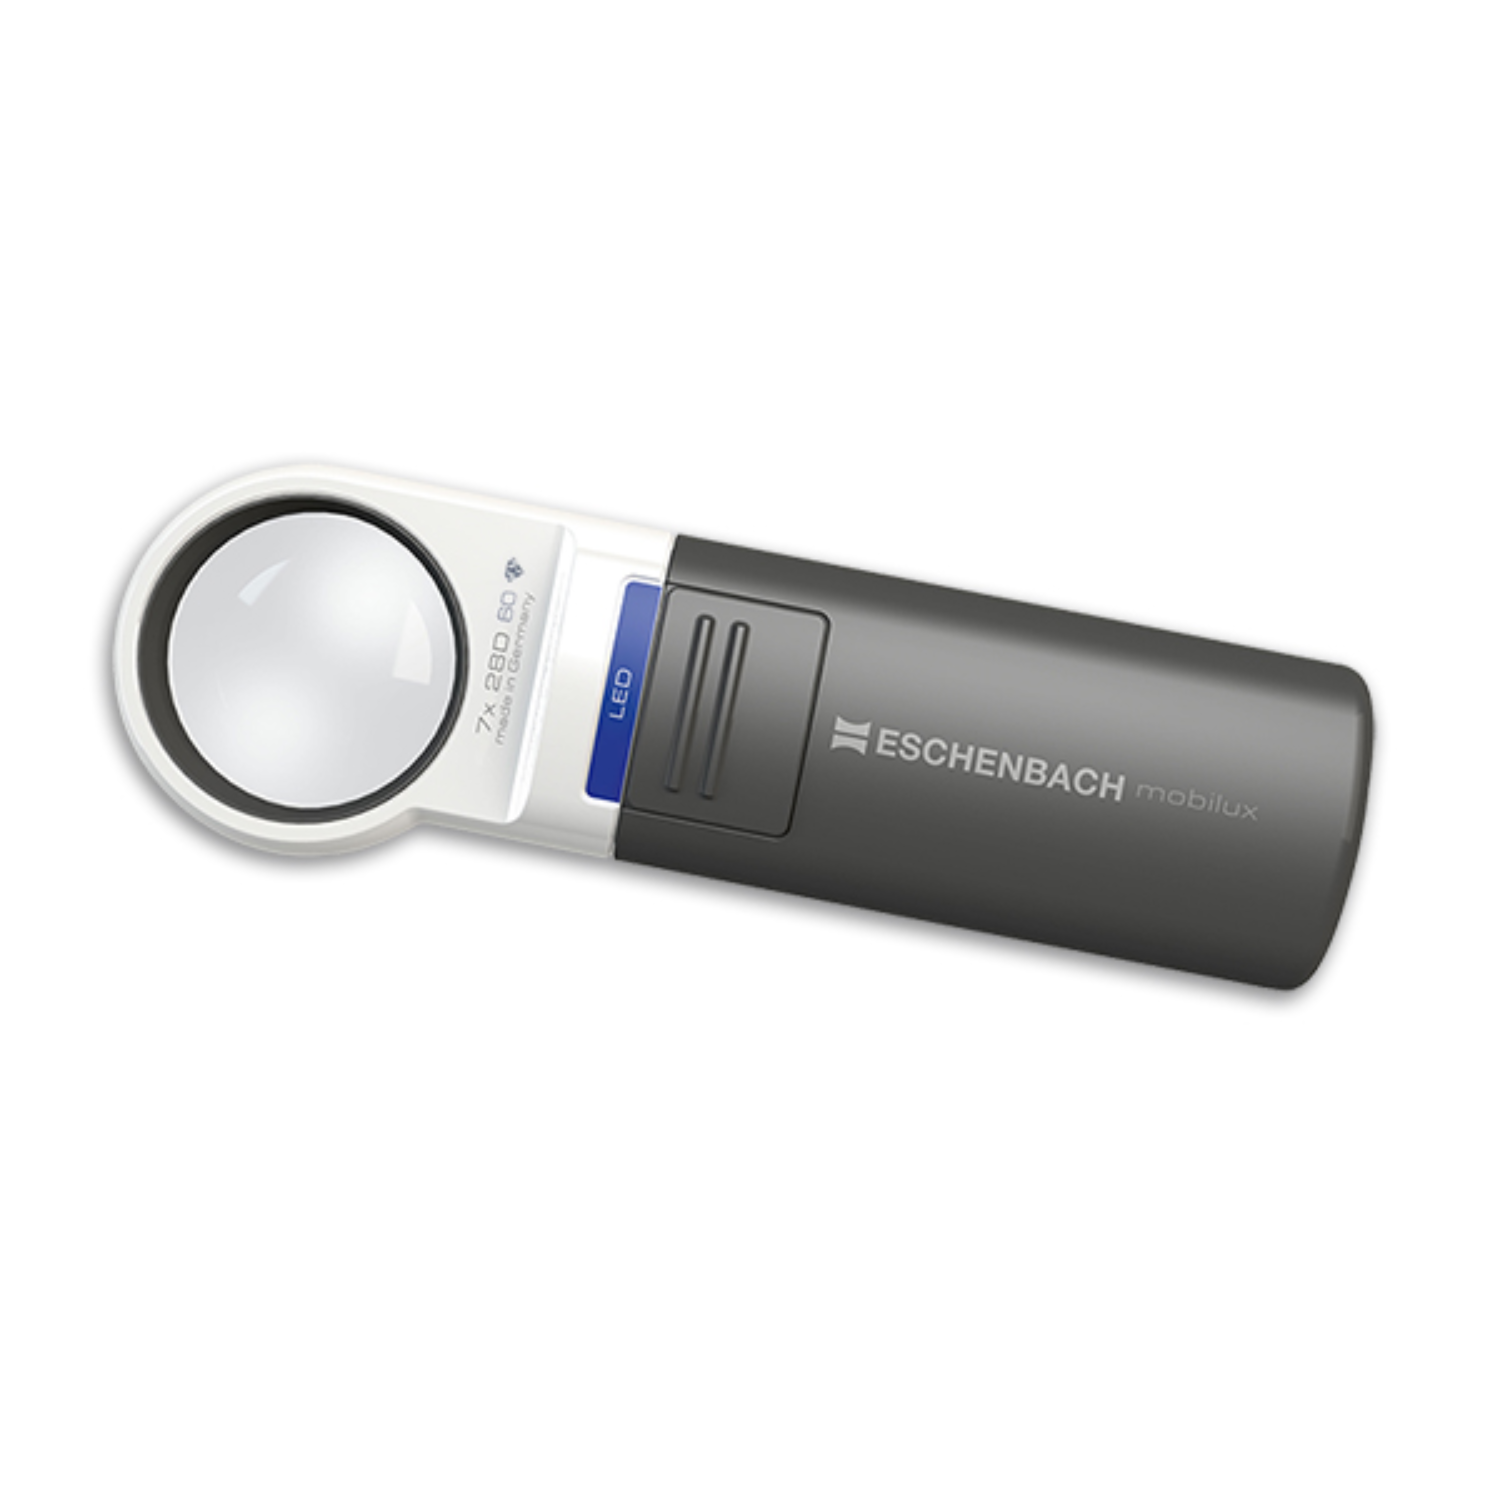 Image of the round 7x Mobilux® LED handheld magnifier from Eschenbach .